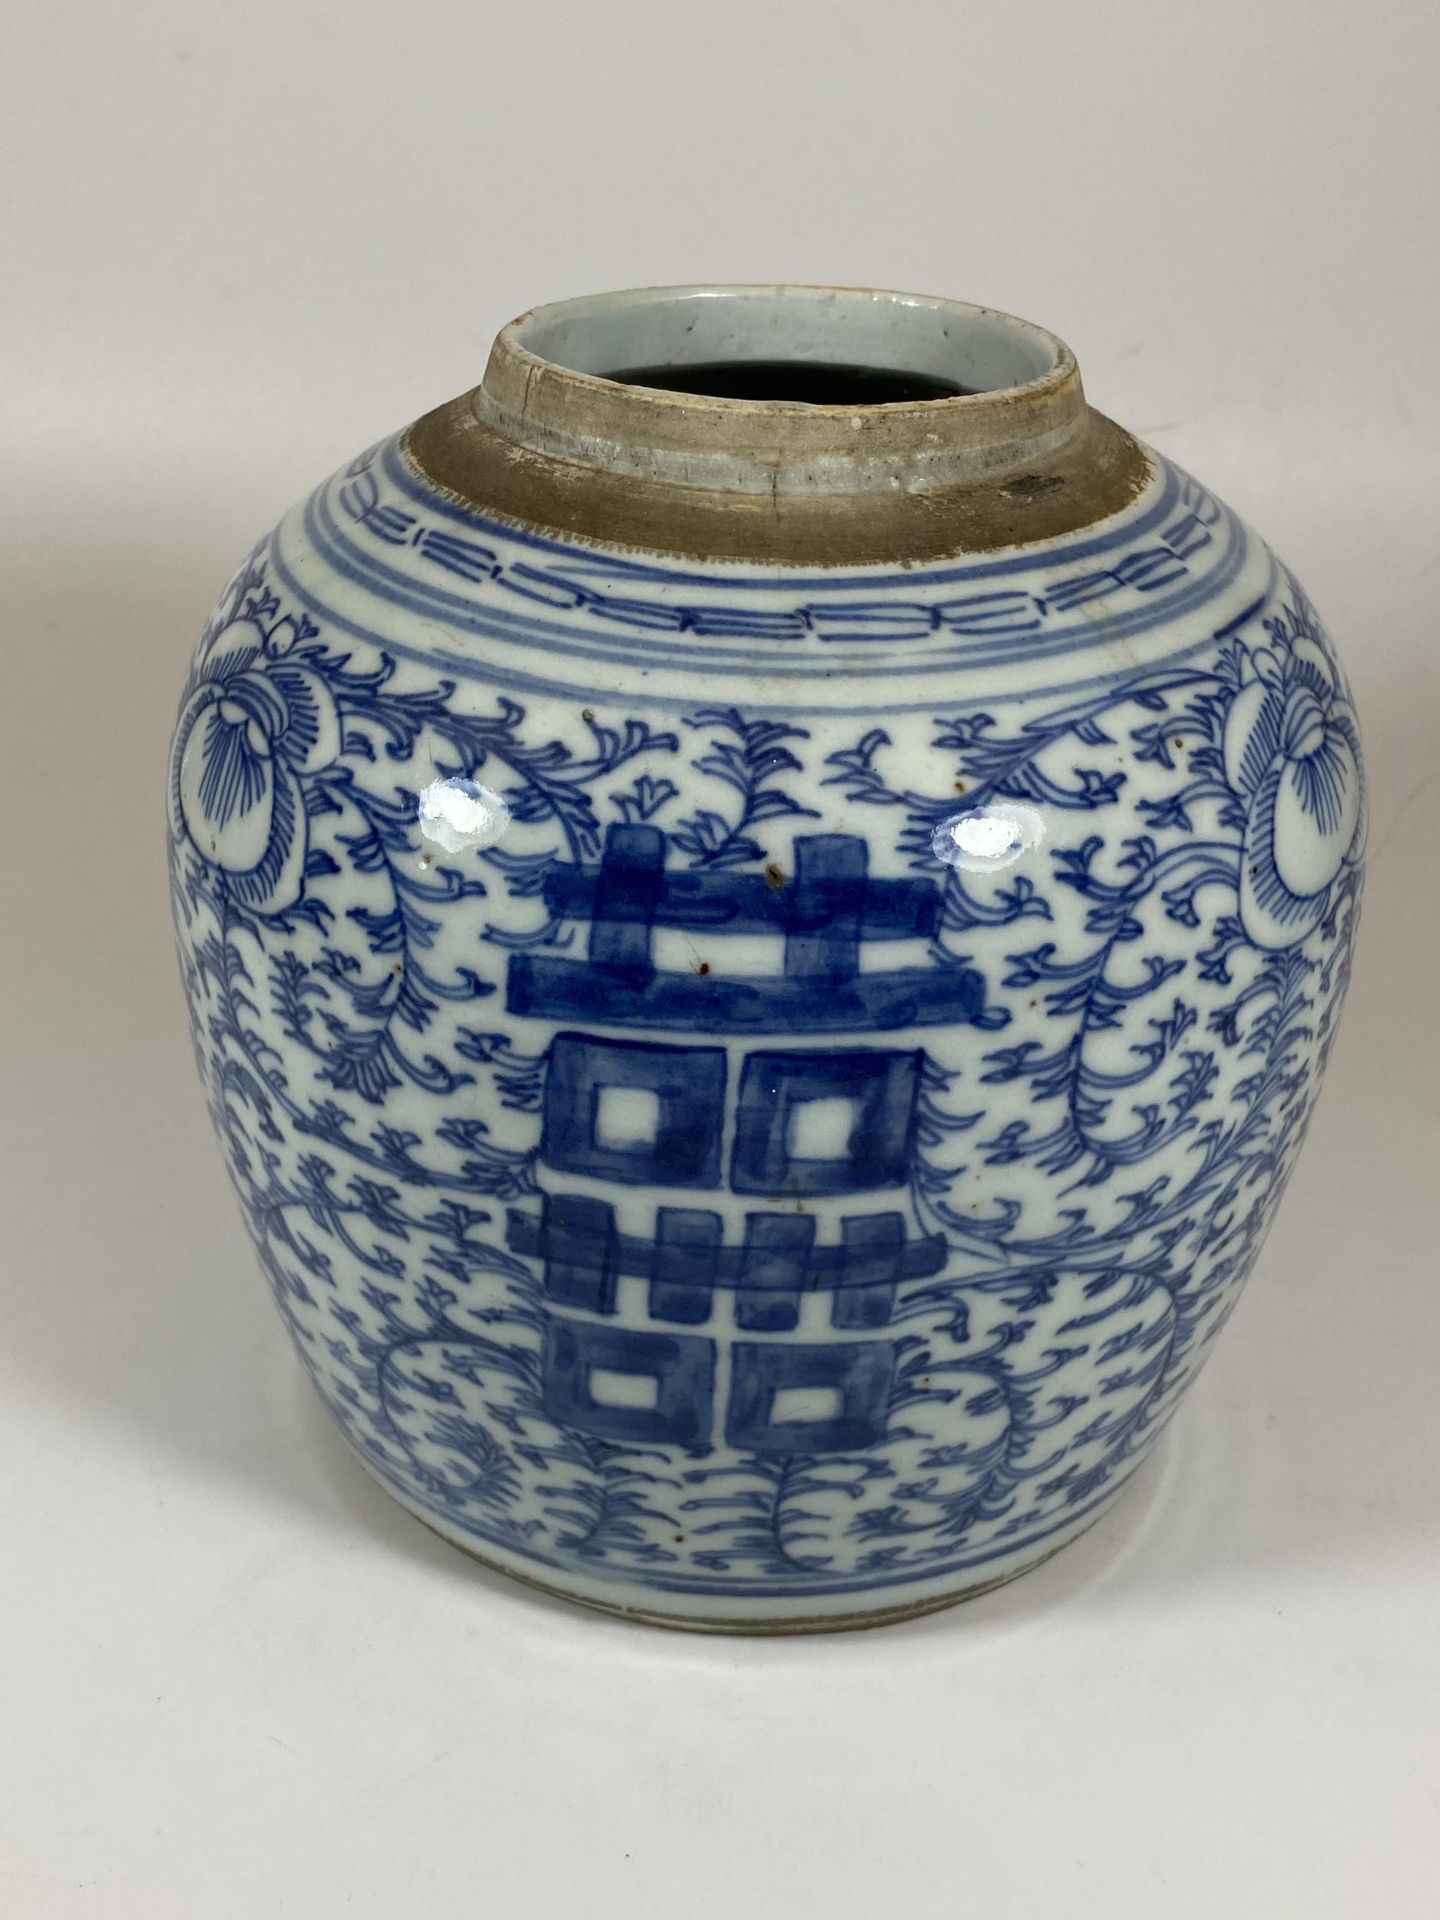 A 19TH CENTURY CHINESE QING BLUE AND WHITE PORCELAIN MARRIAGE GINGER JAR, HEIGHT 19CM - Image 3 of 5